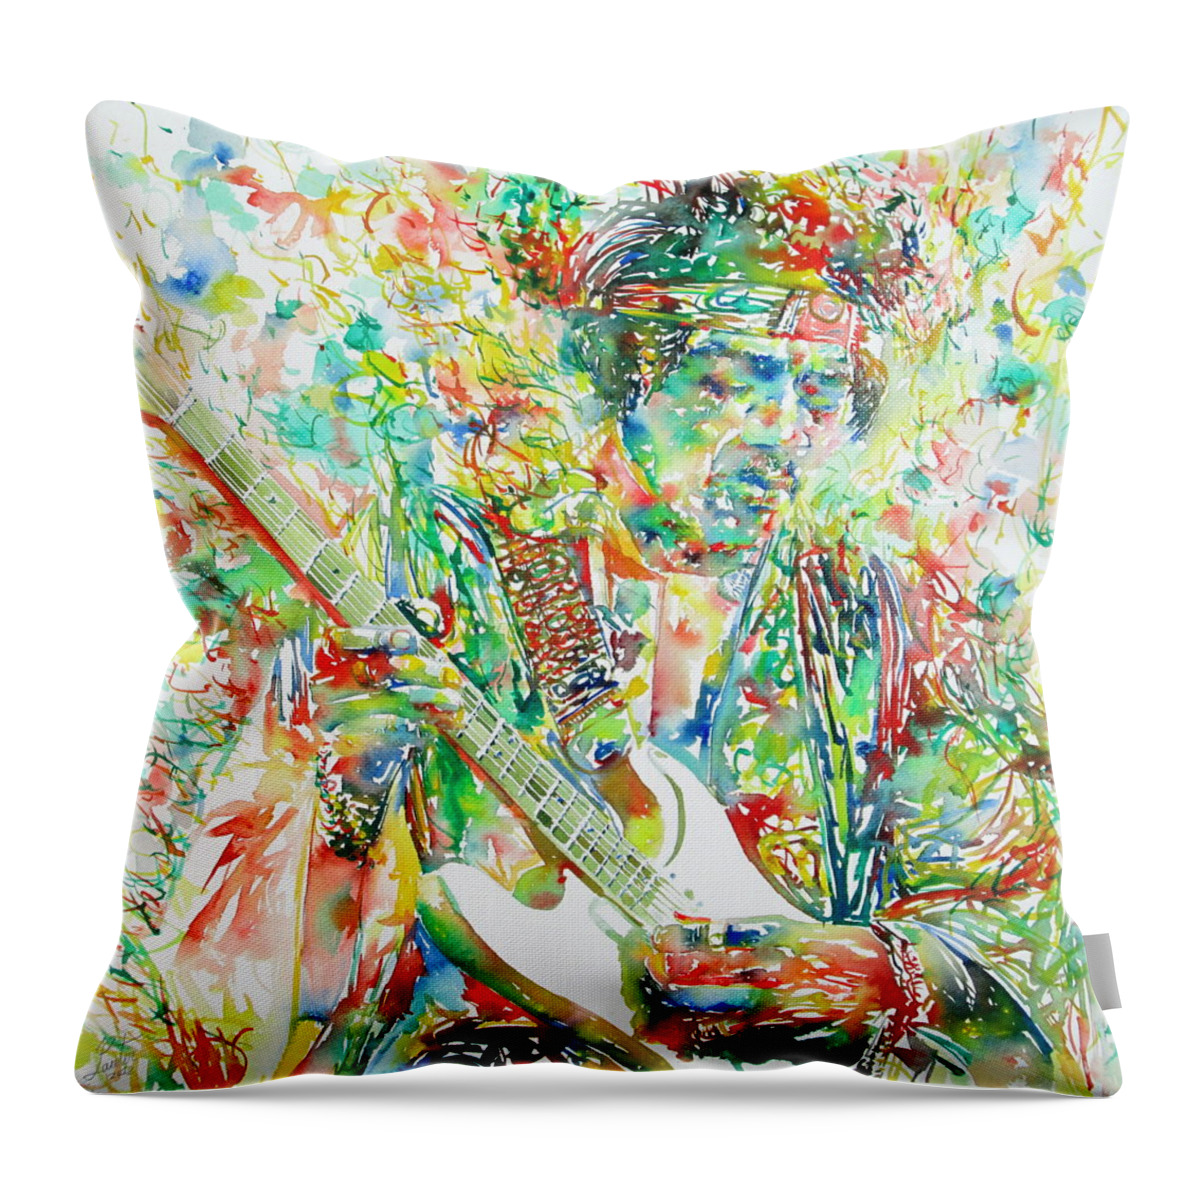 Jimi Throw Pillow featuring the painting Jimi Hendrix Playing The Guitar Portrait.1 by Fabrizio Cassetta